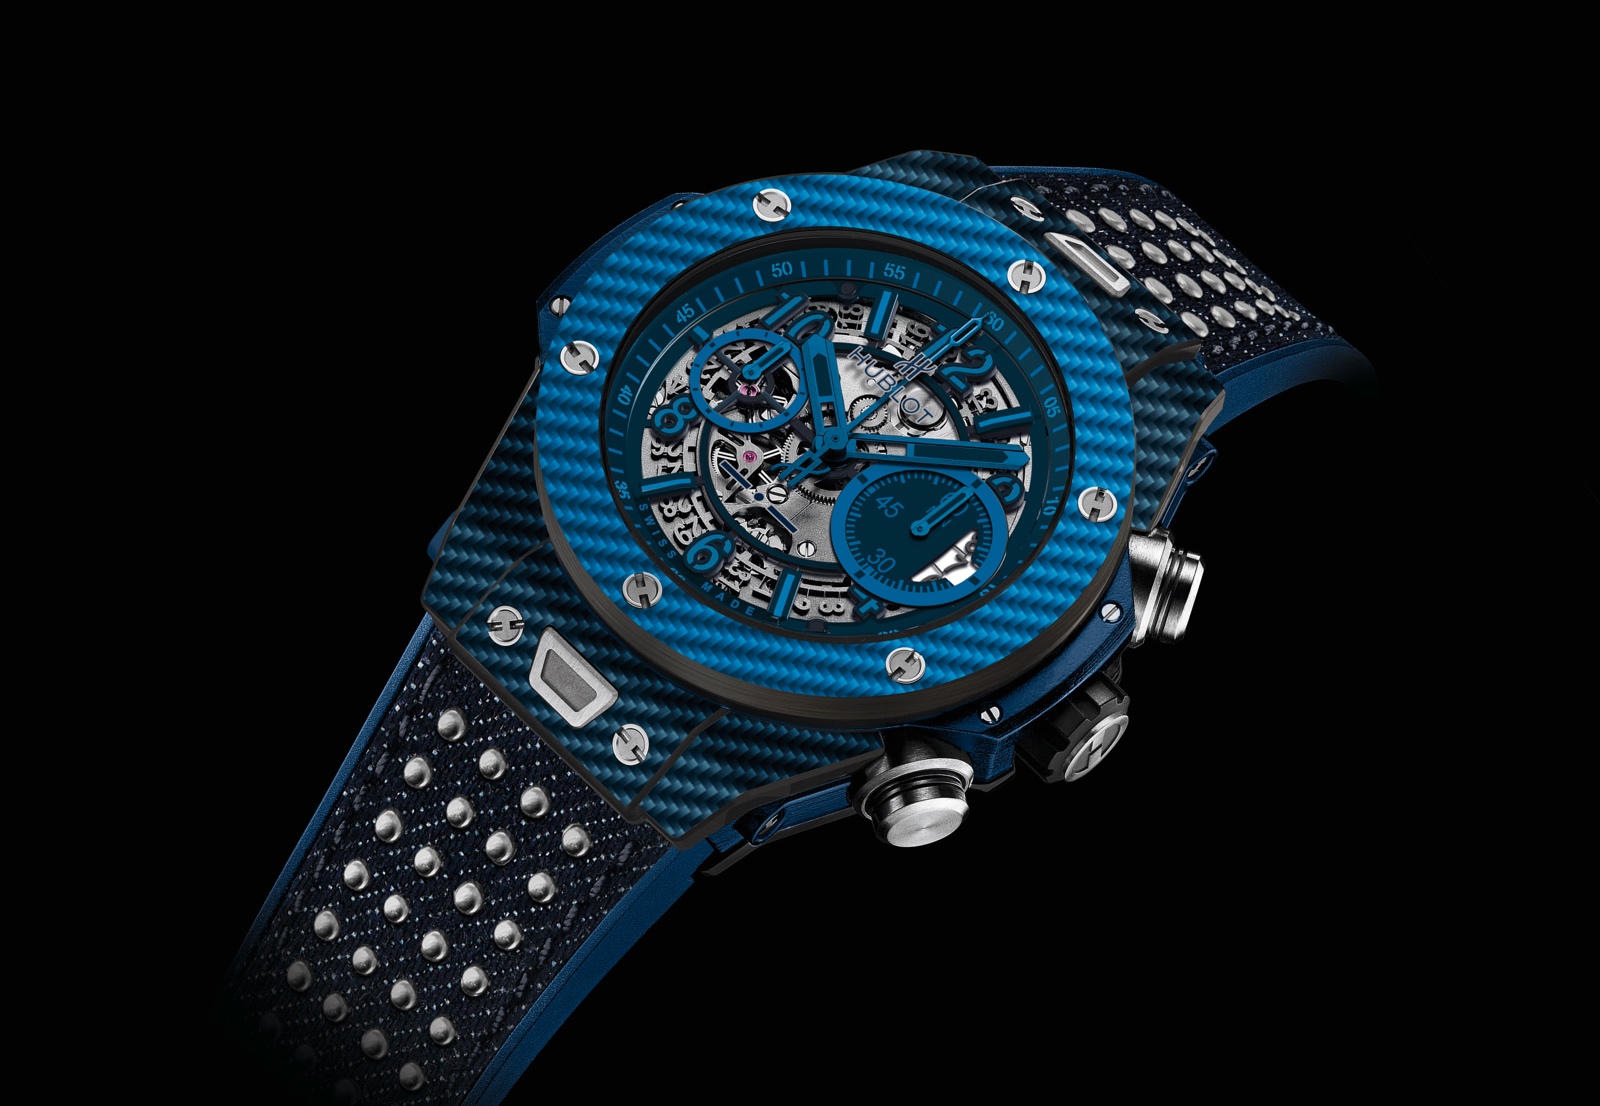 Hublot new watch with blue color-Big Bang Italia Independent